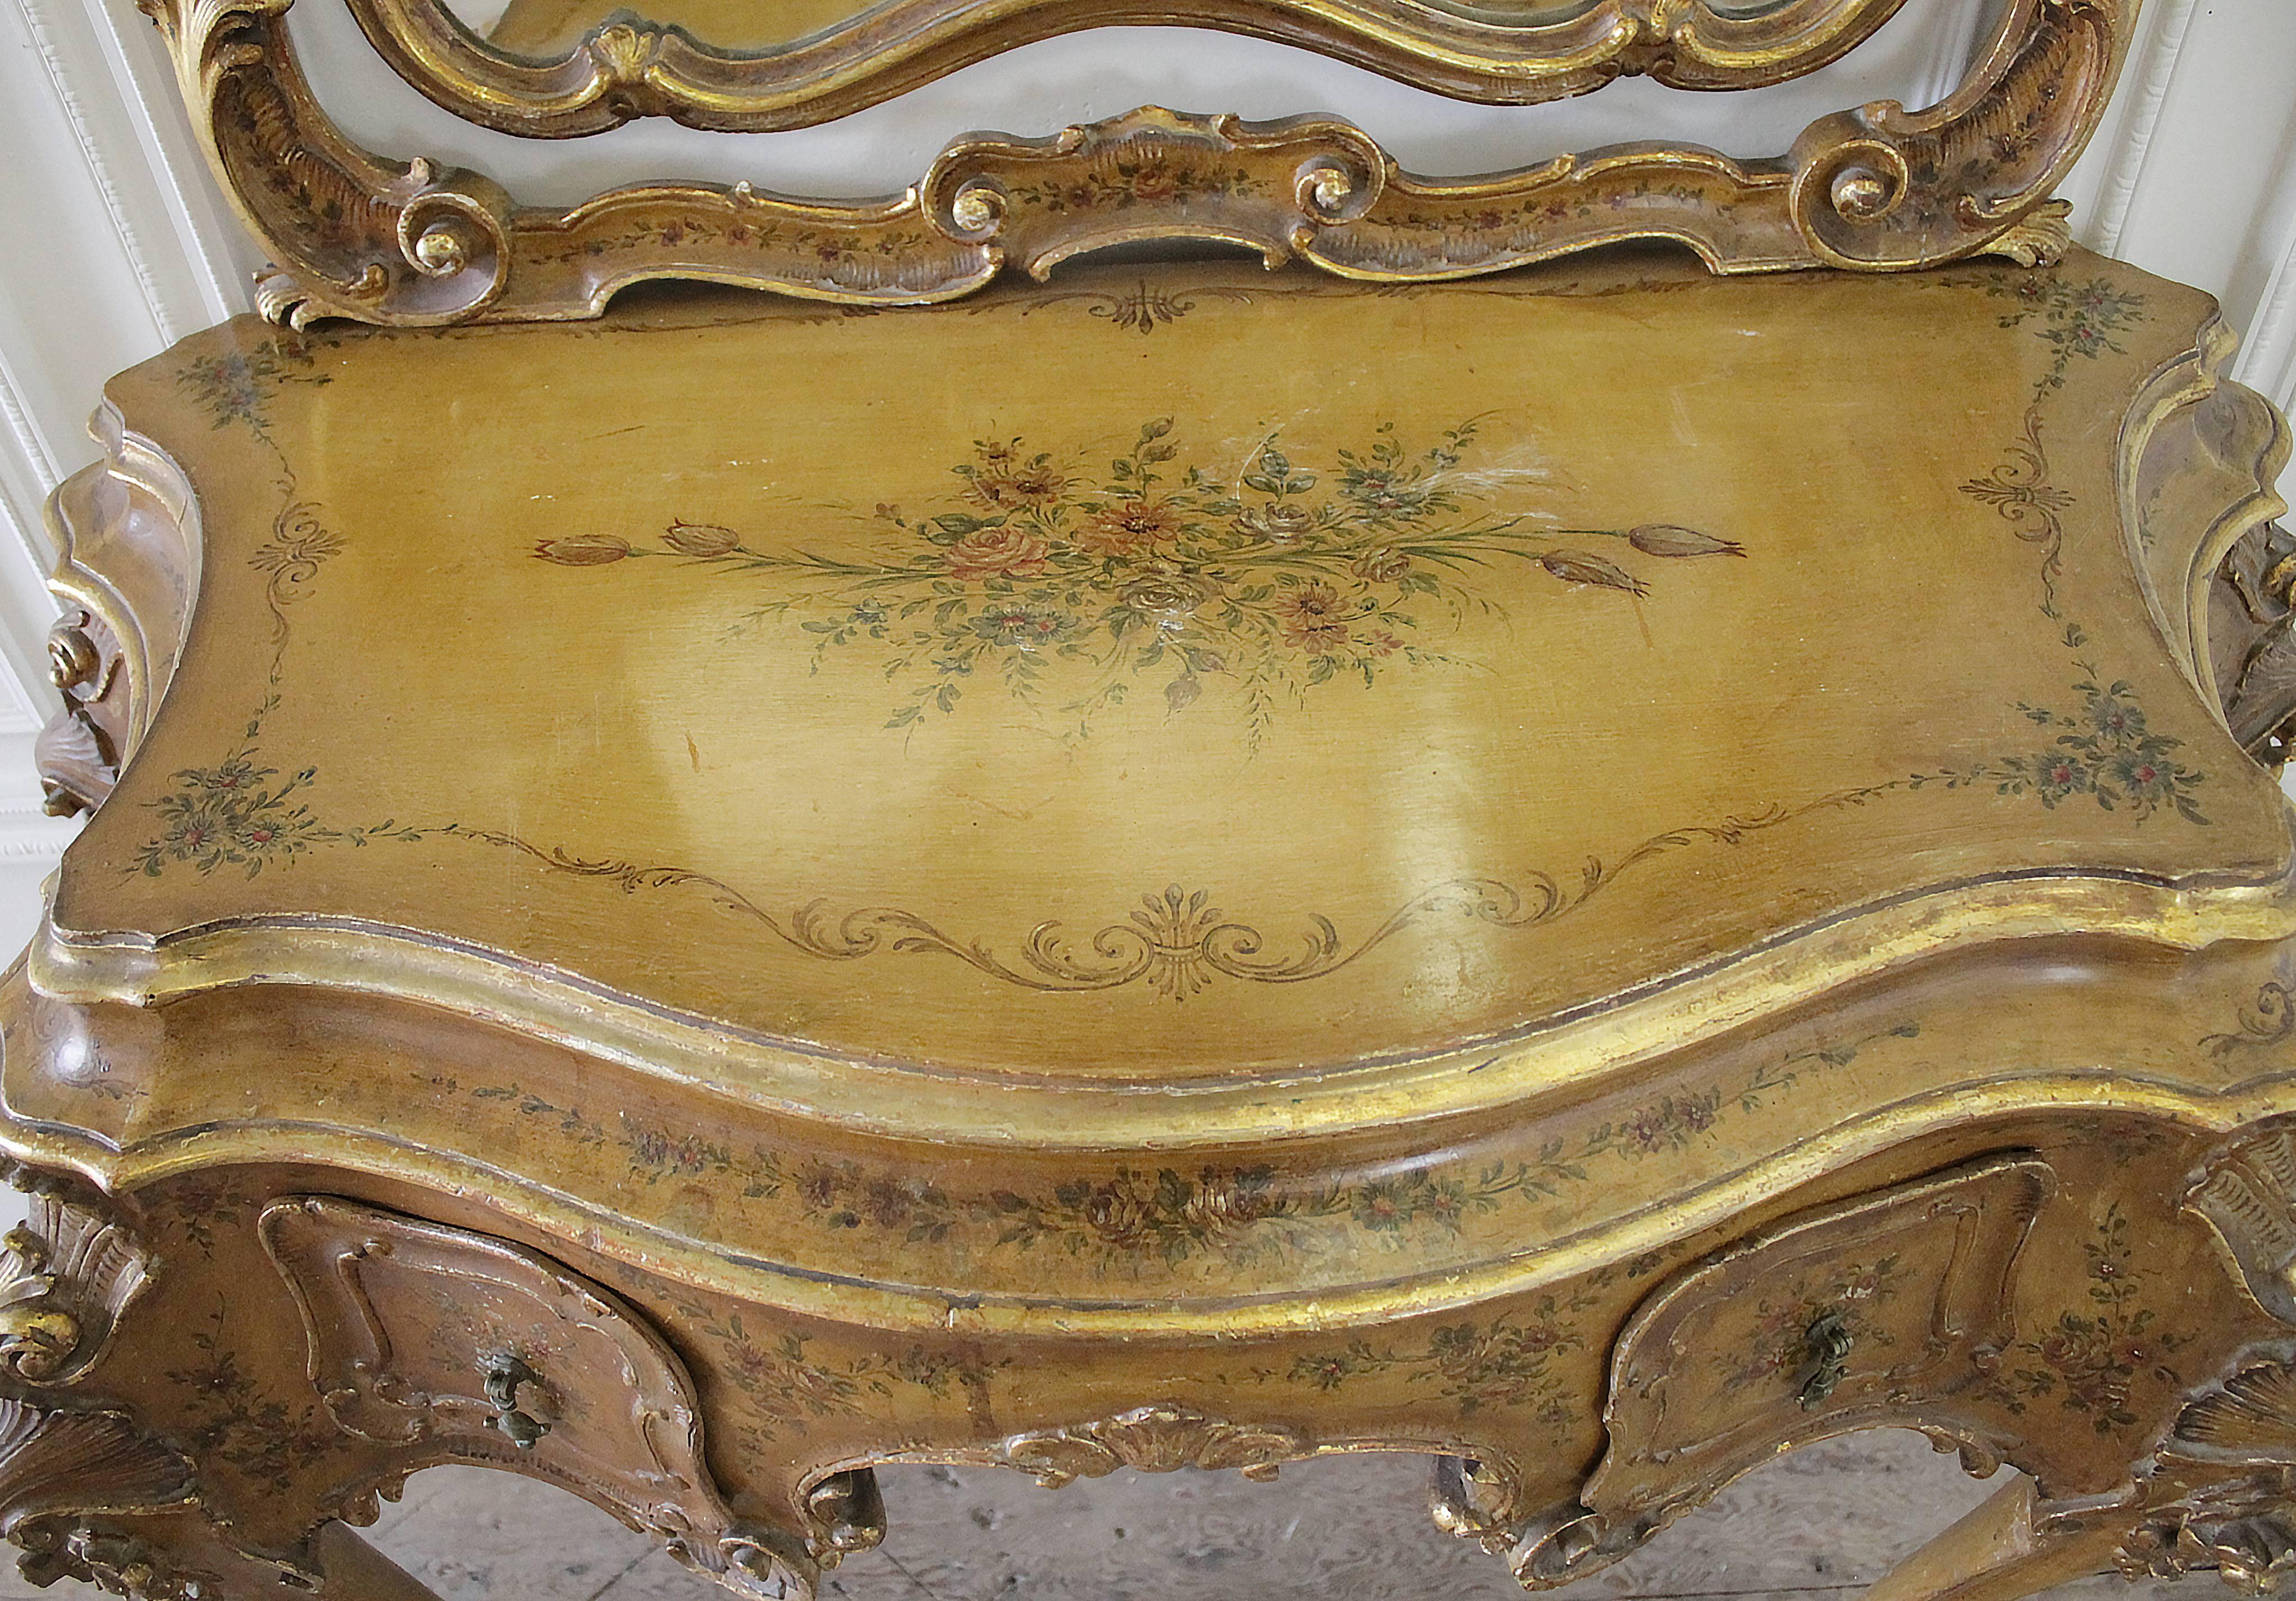 Hand-Painted 20th Century Italian Polychrome Vanity in the Rococo Style